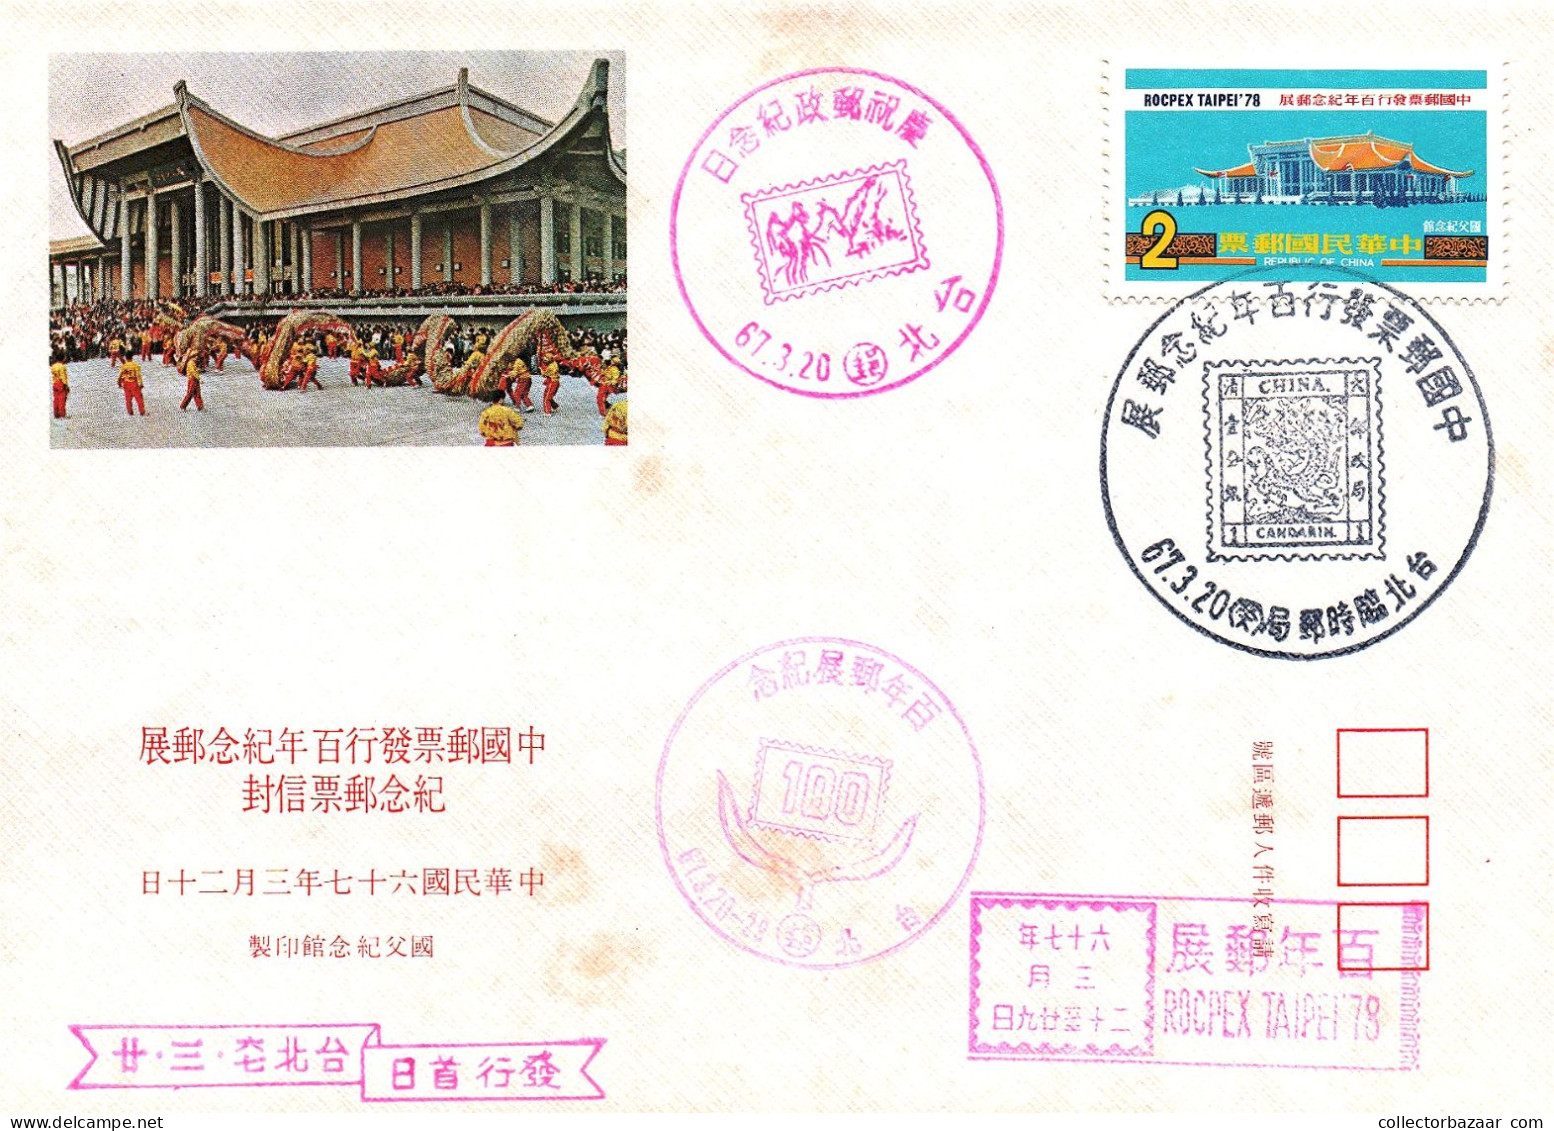 Taiwan Formosa Republic Of China FDC Dr. Sun Yat-Sen Memorial Hall Building Architecture ROCPEX TAIPEI'78  - 2$ Stamps - FDC